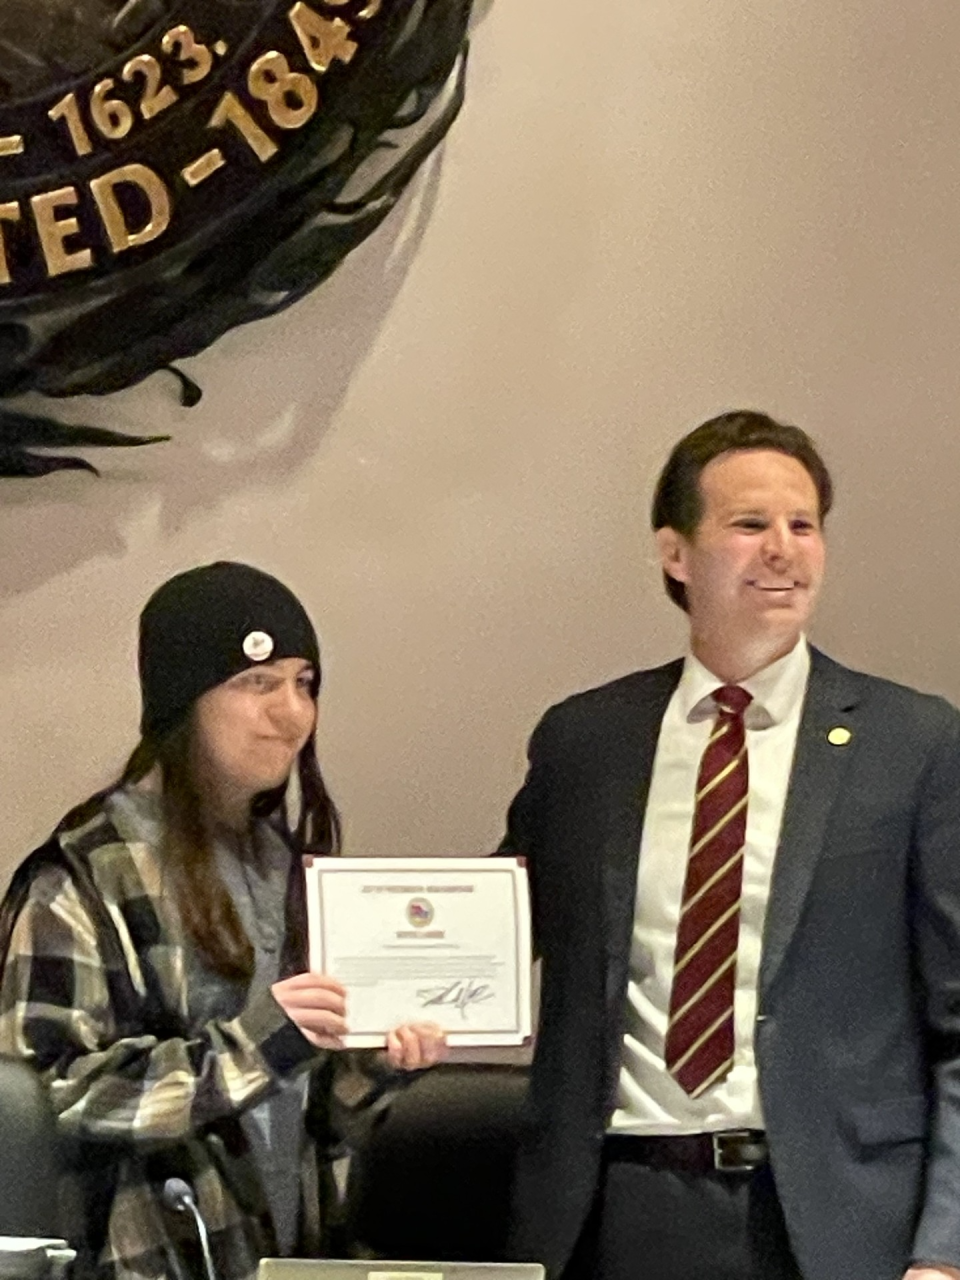 Alexander Maillet, 17, of Portsmouth, was recently honored with a Mayor's Award from Portsmouth Mayor Deaglan McEachern for his quick thinking that save his manager's life when the man suffered a heart attack